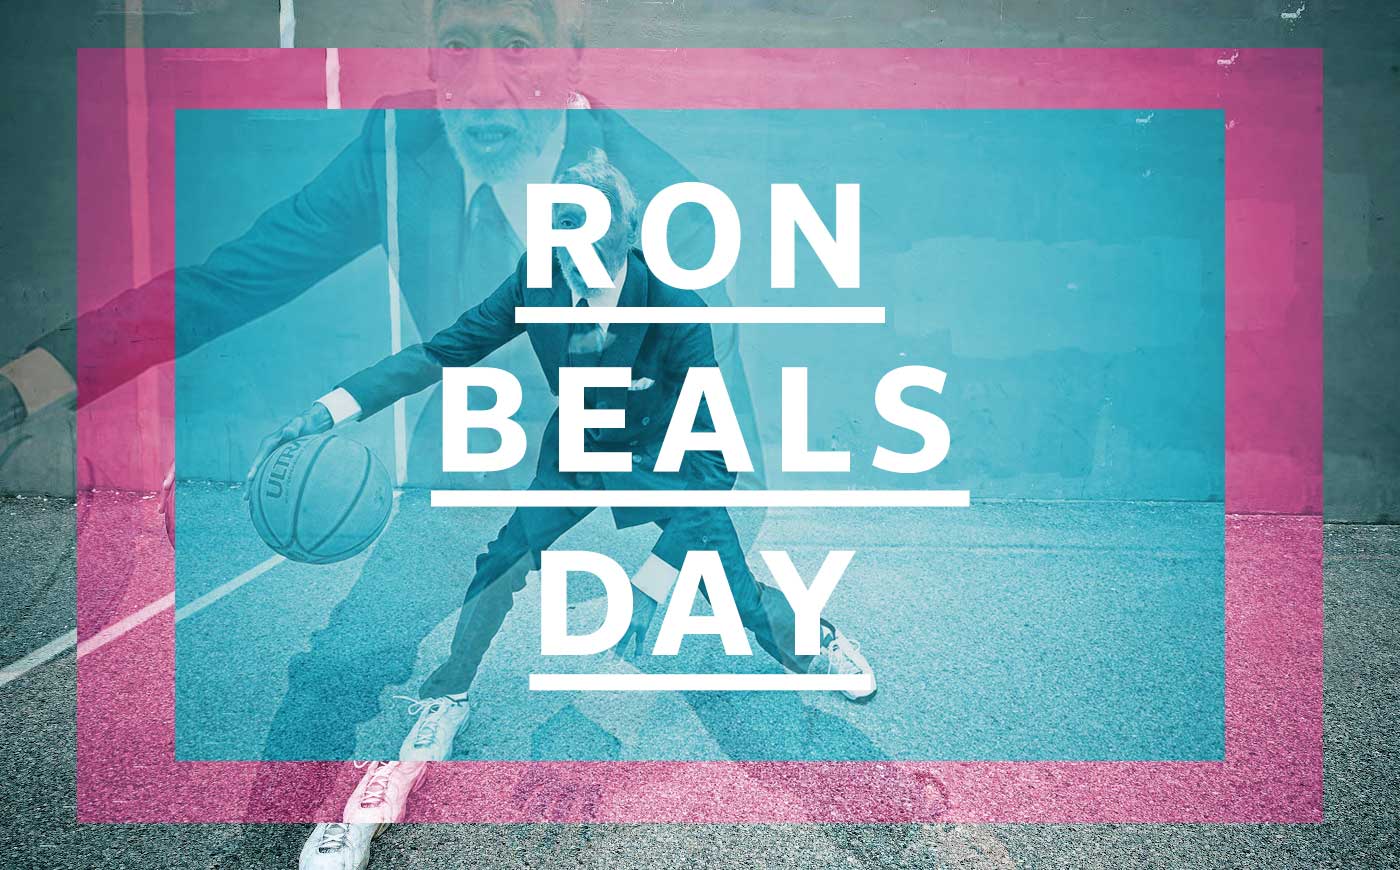 2017 VBL Ron Beals Day – Full Schedule